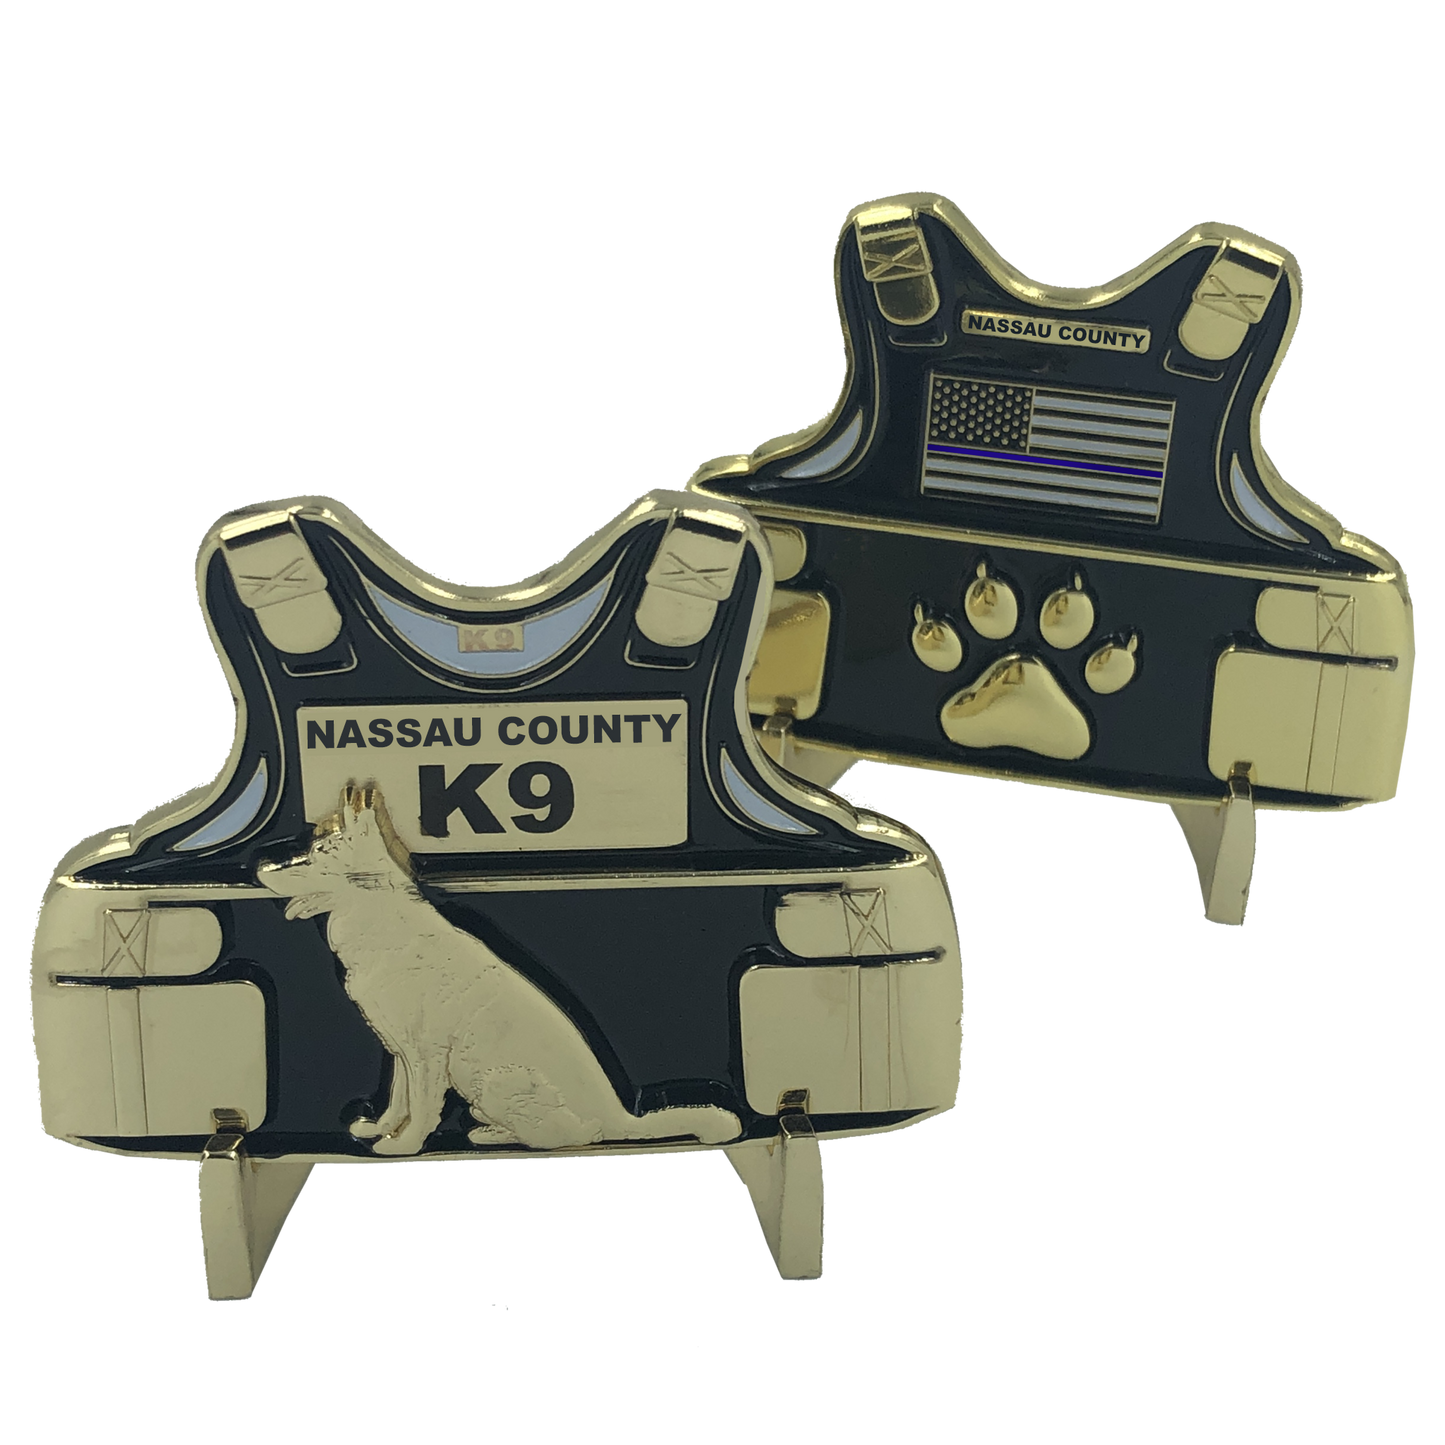 CL9-02 Nassau County Police Department Long Island New York K9 Body Armor Challenge Coin Canine NY NCPD Sheriff's Office